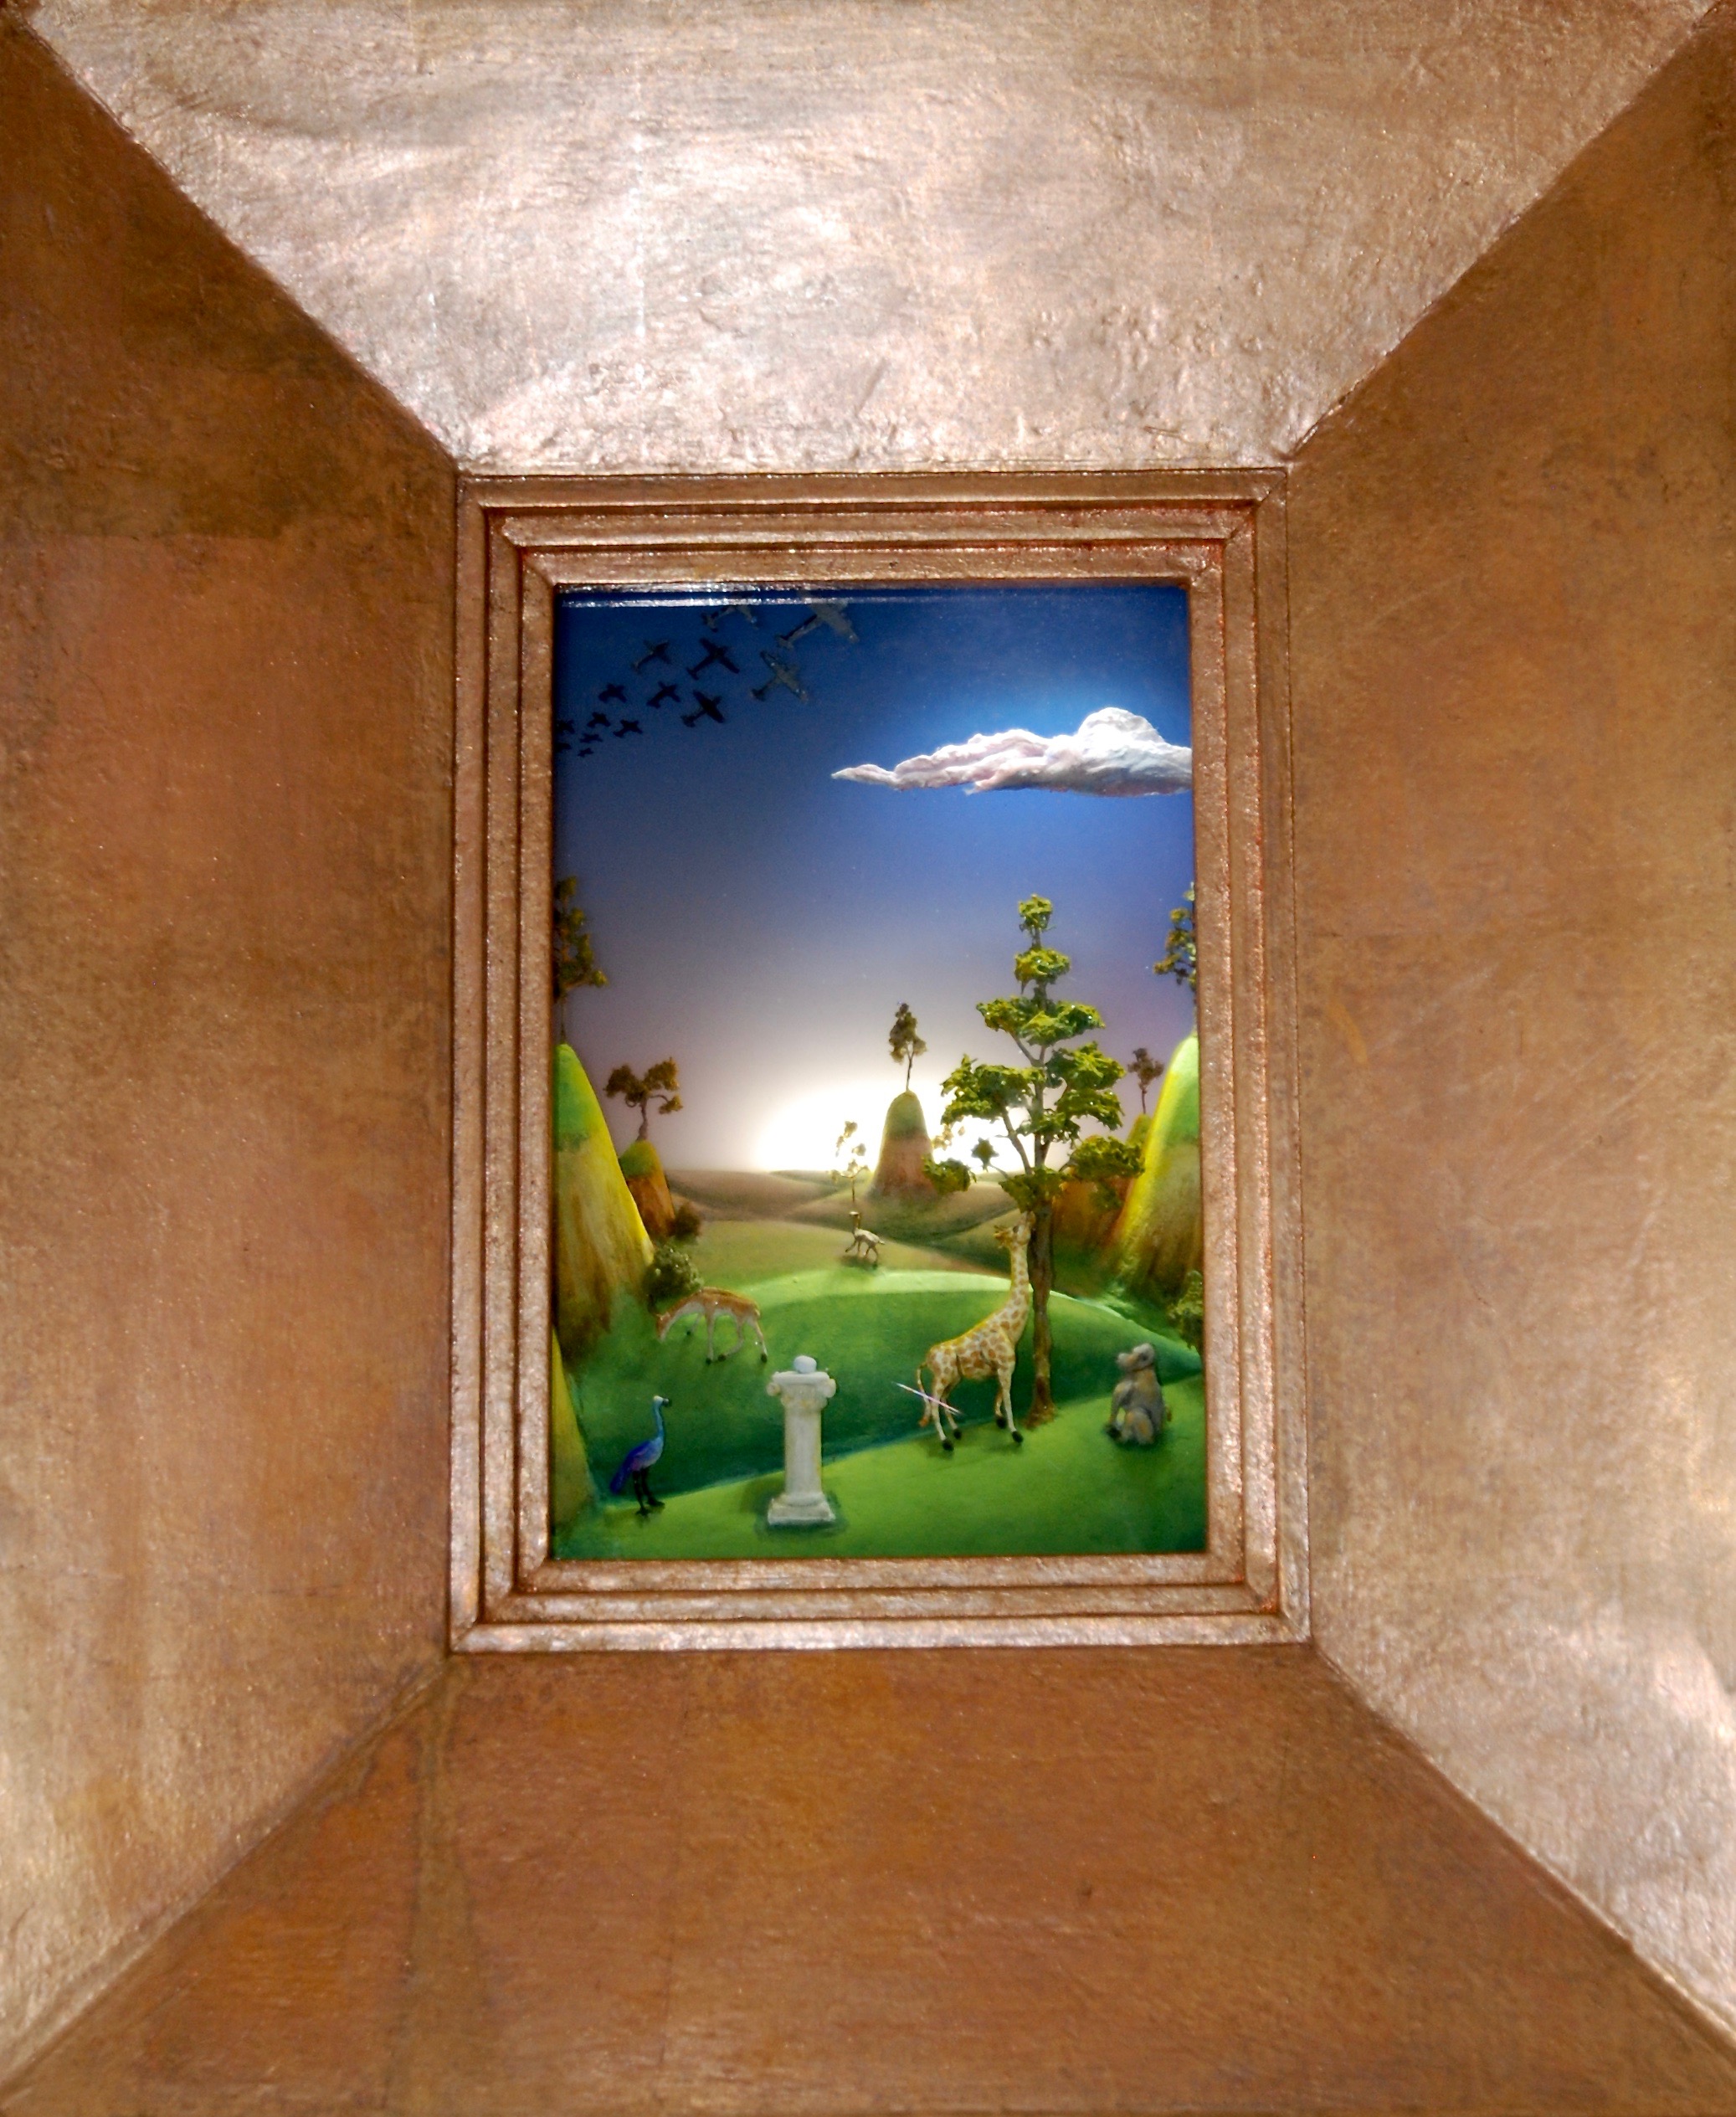   Thomas Coffin - A Peaceable Kingdom, 20"h x 16"w x 5 3/4"d, mixed media 3-d diorama encased in acrylic resin, wood frame, copper leaf  